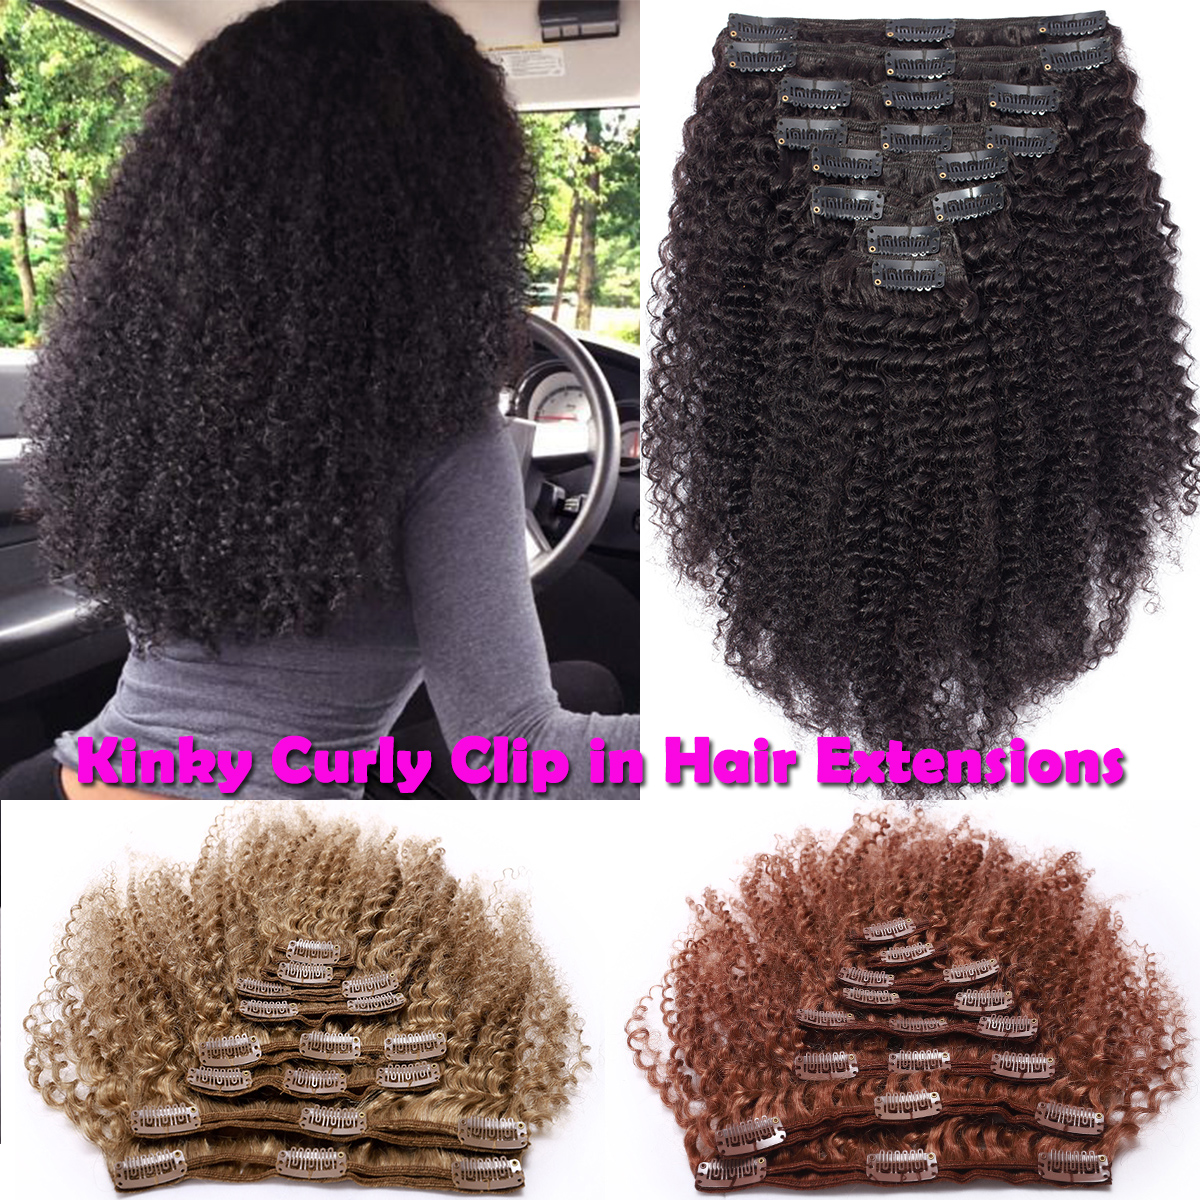 SEGO Kinky Curly Clip in Hair Extensions Real Human Hair for Women Thick Brazilian Hair Natural Black - image 1 of 8